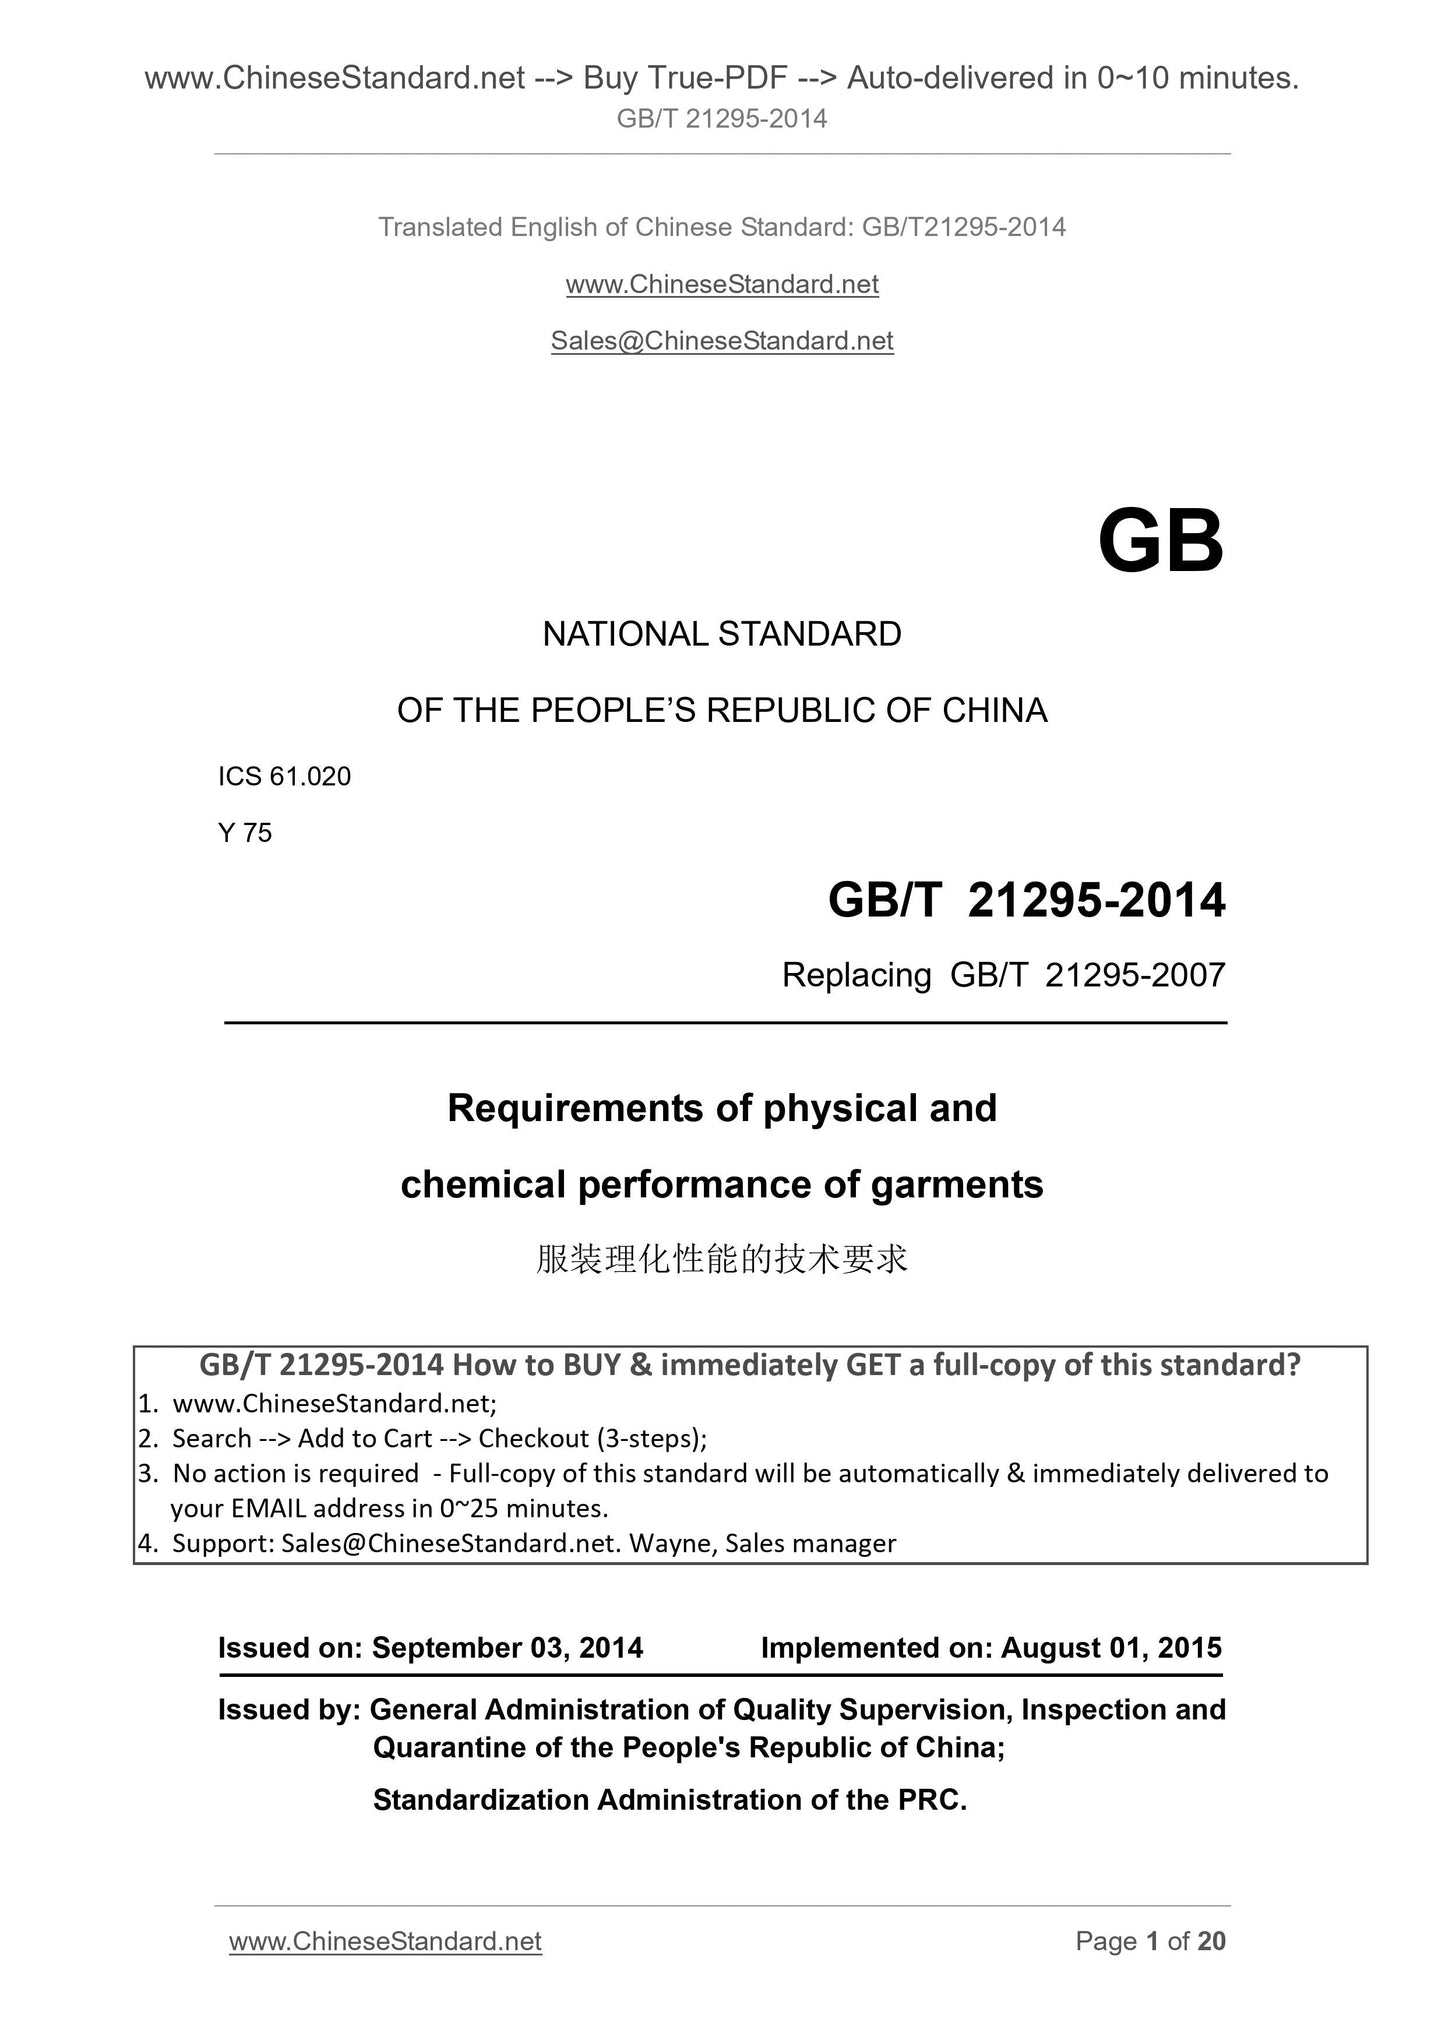 GB/T 21295-2014 Page 1